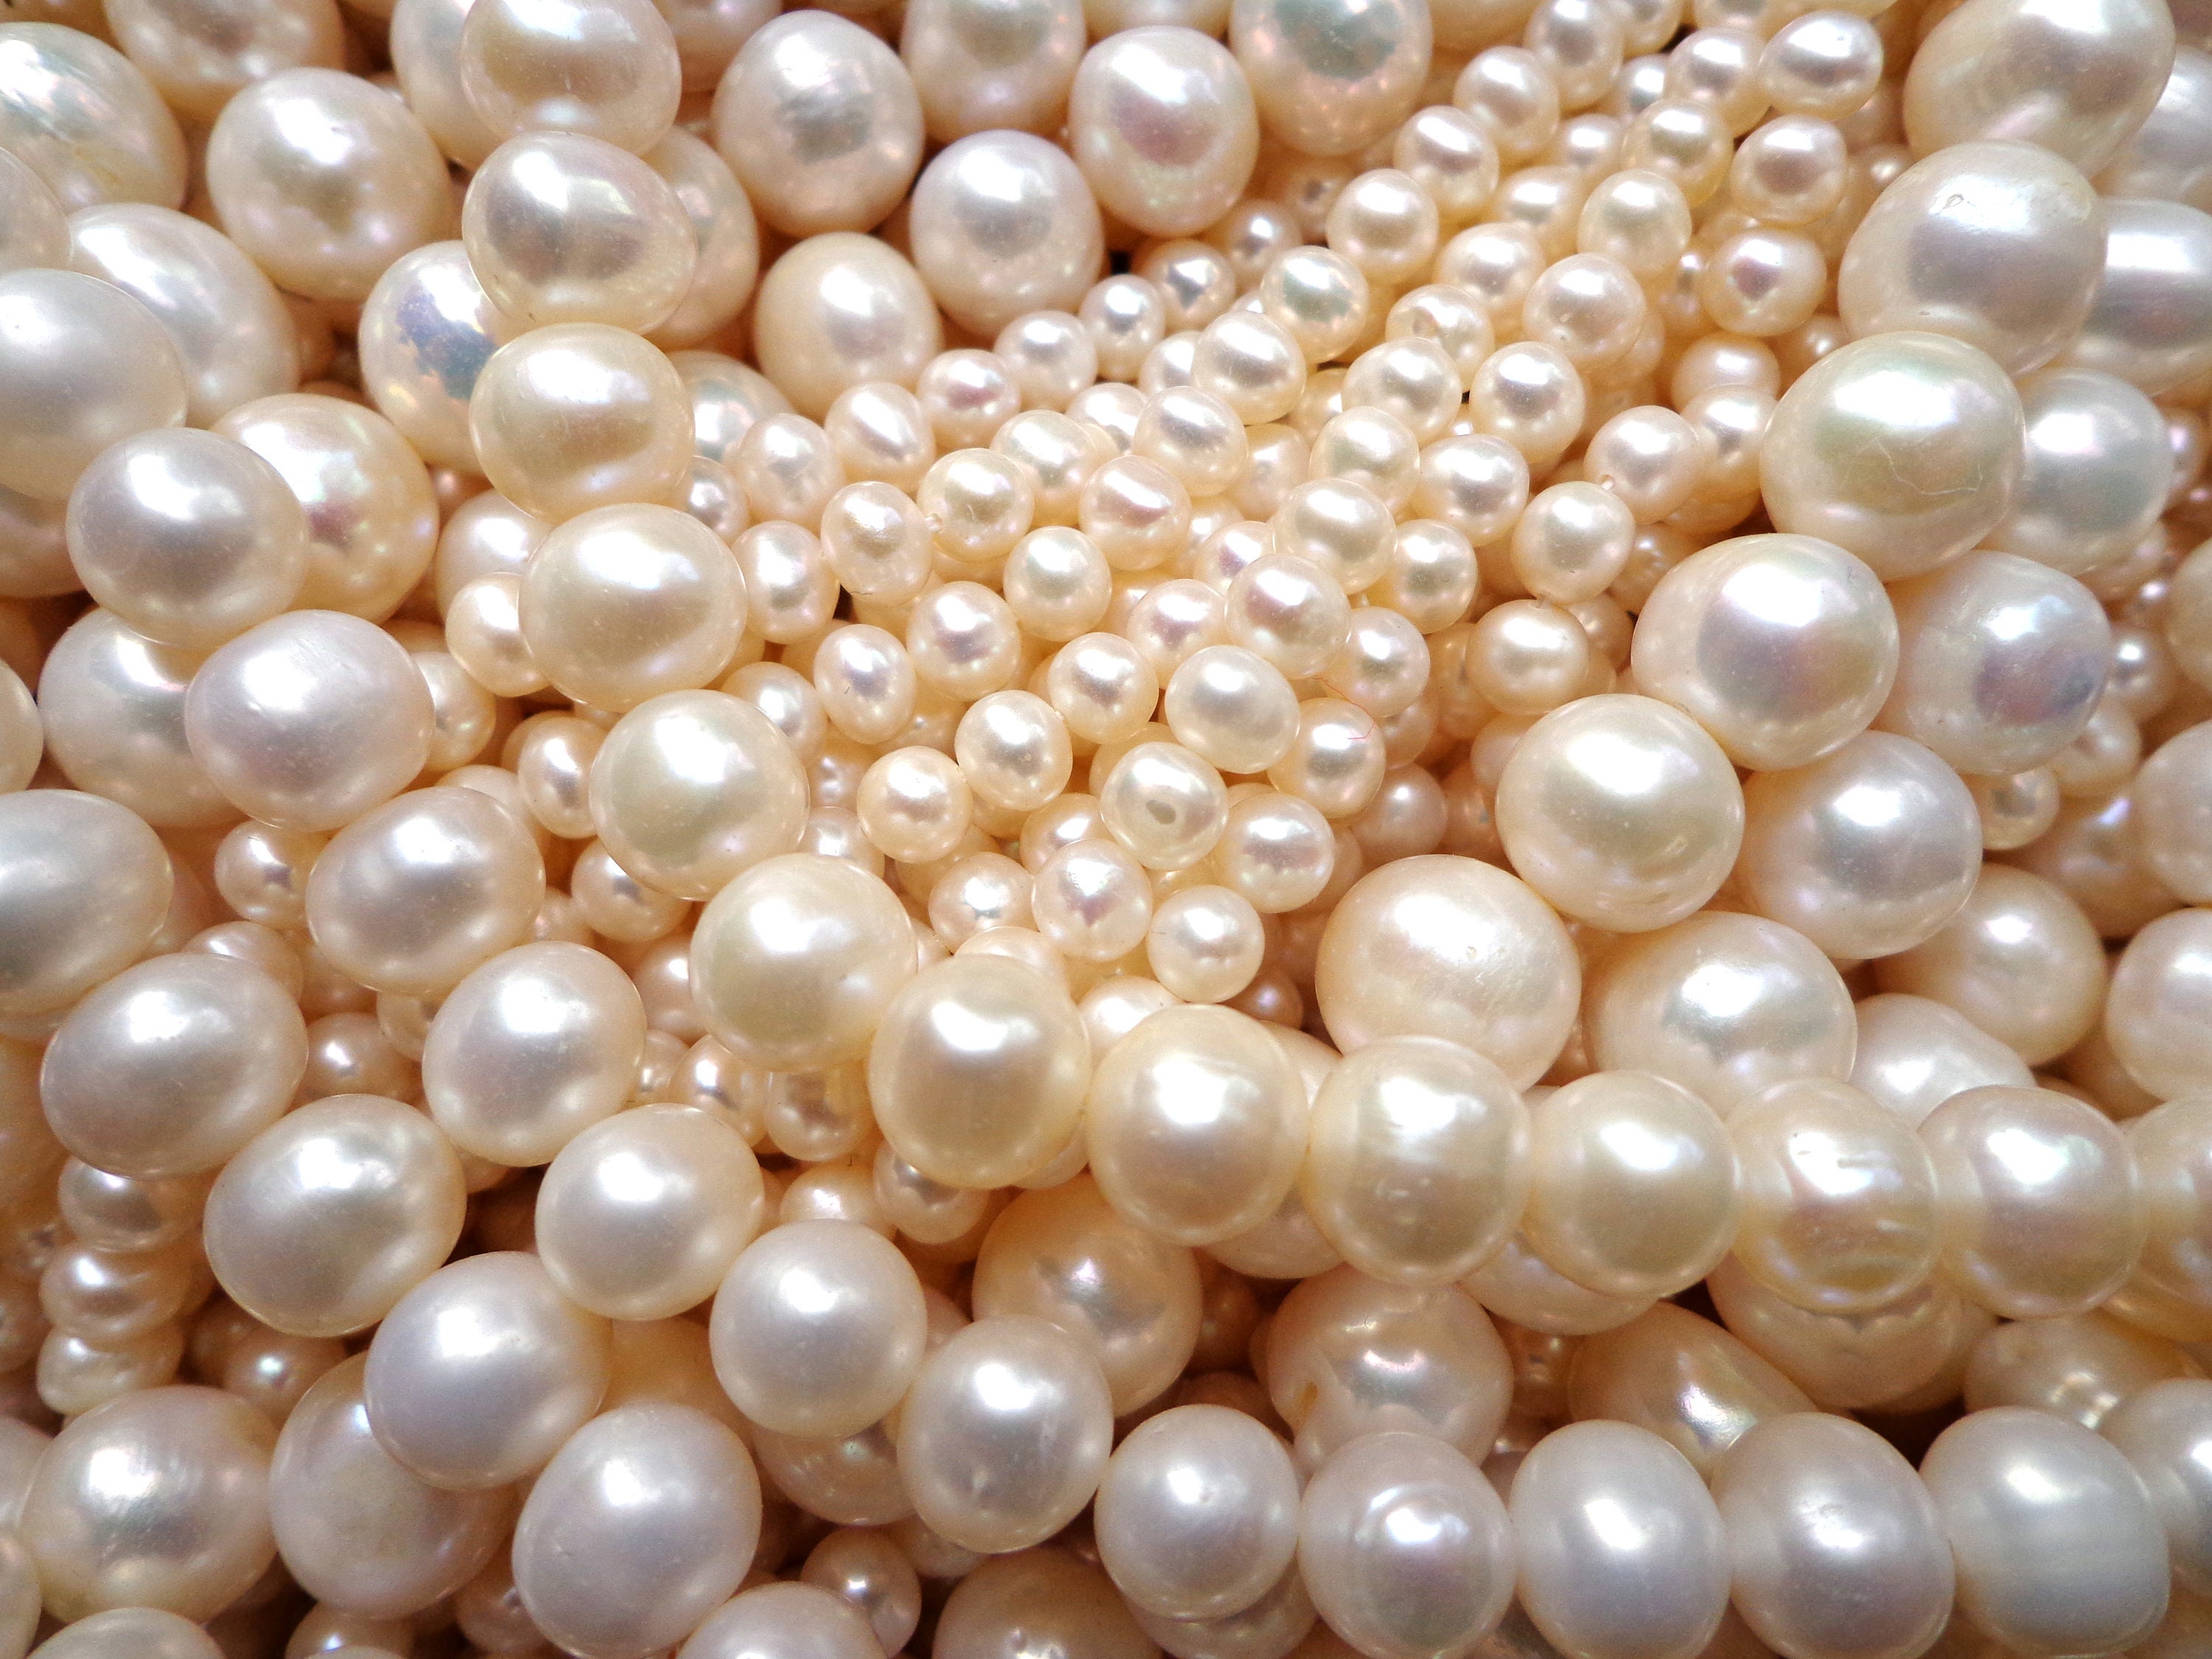  Pearl Party Decorations